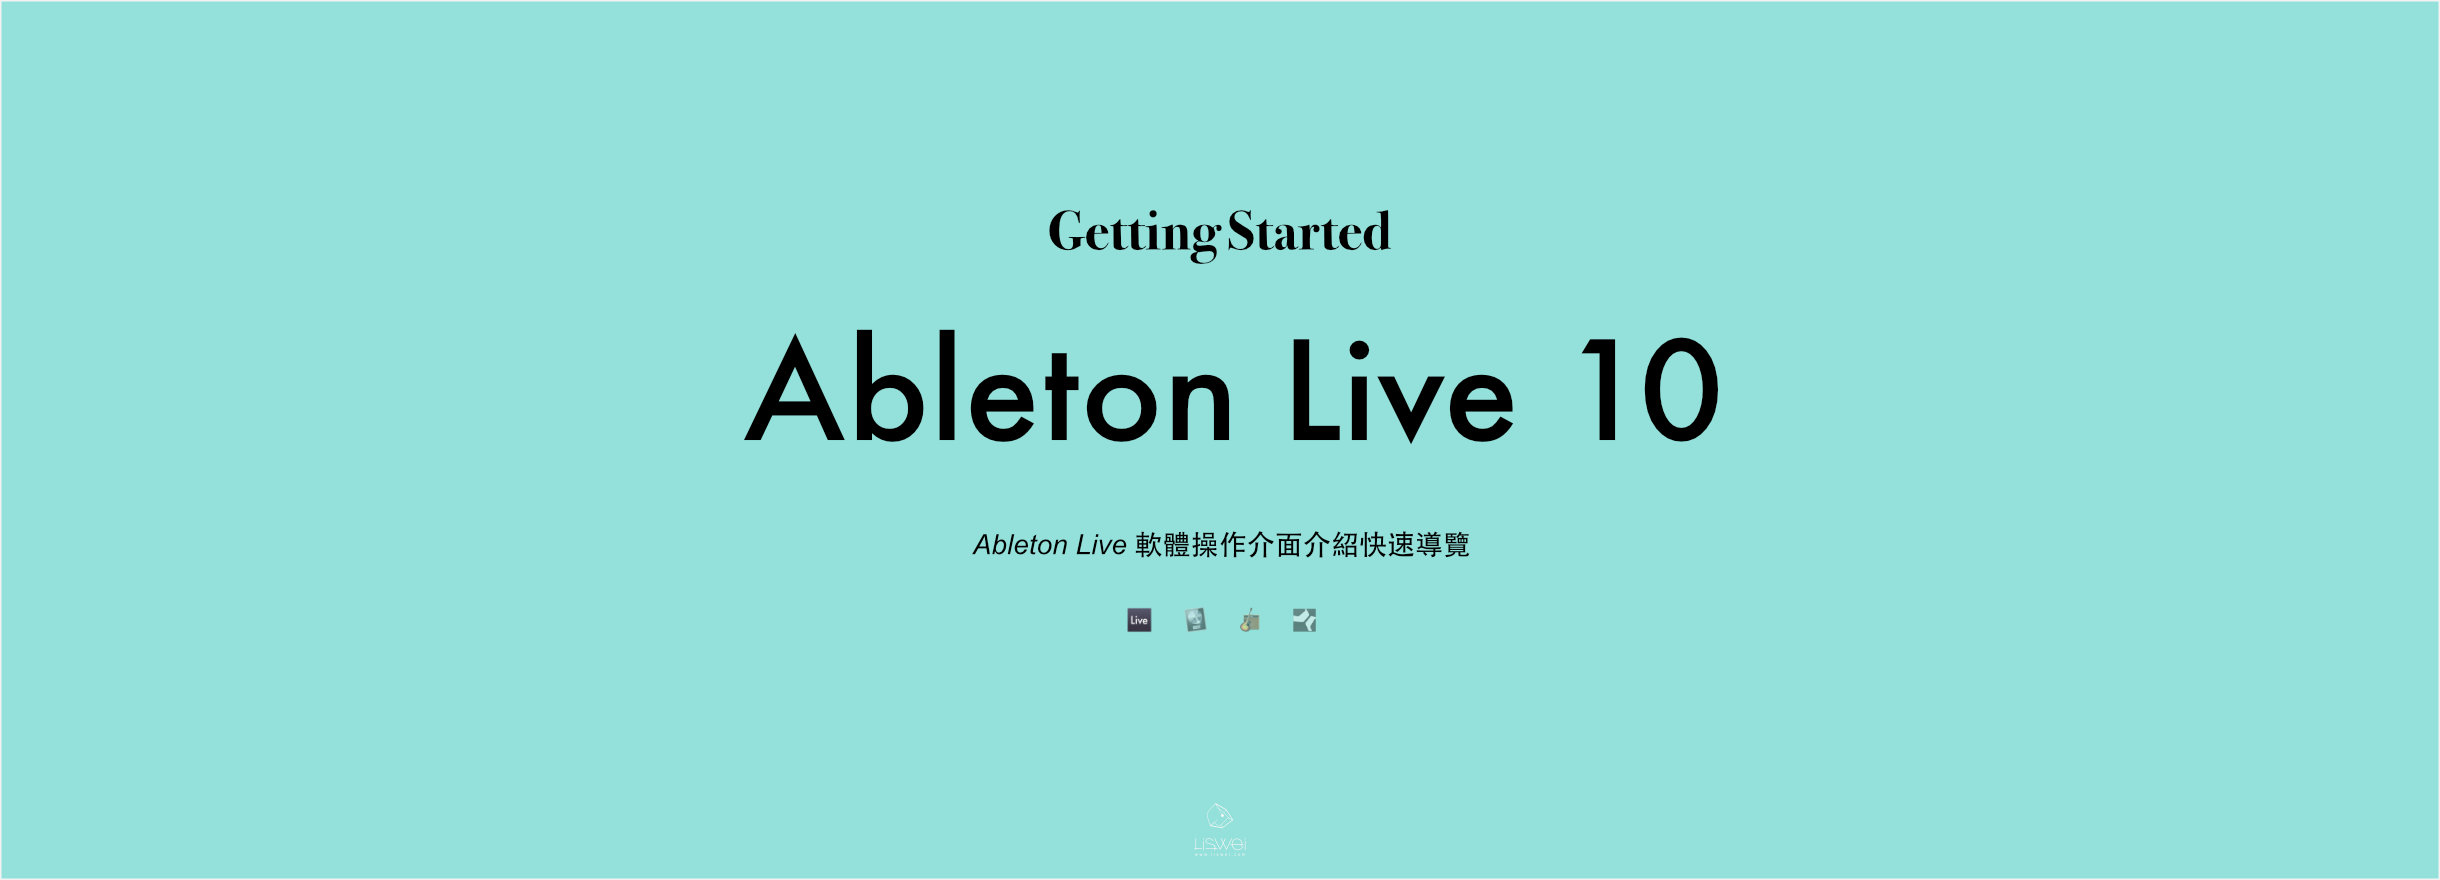 Getting Started Ableton live